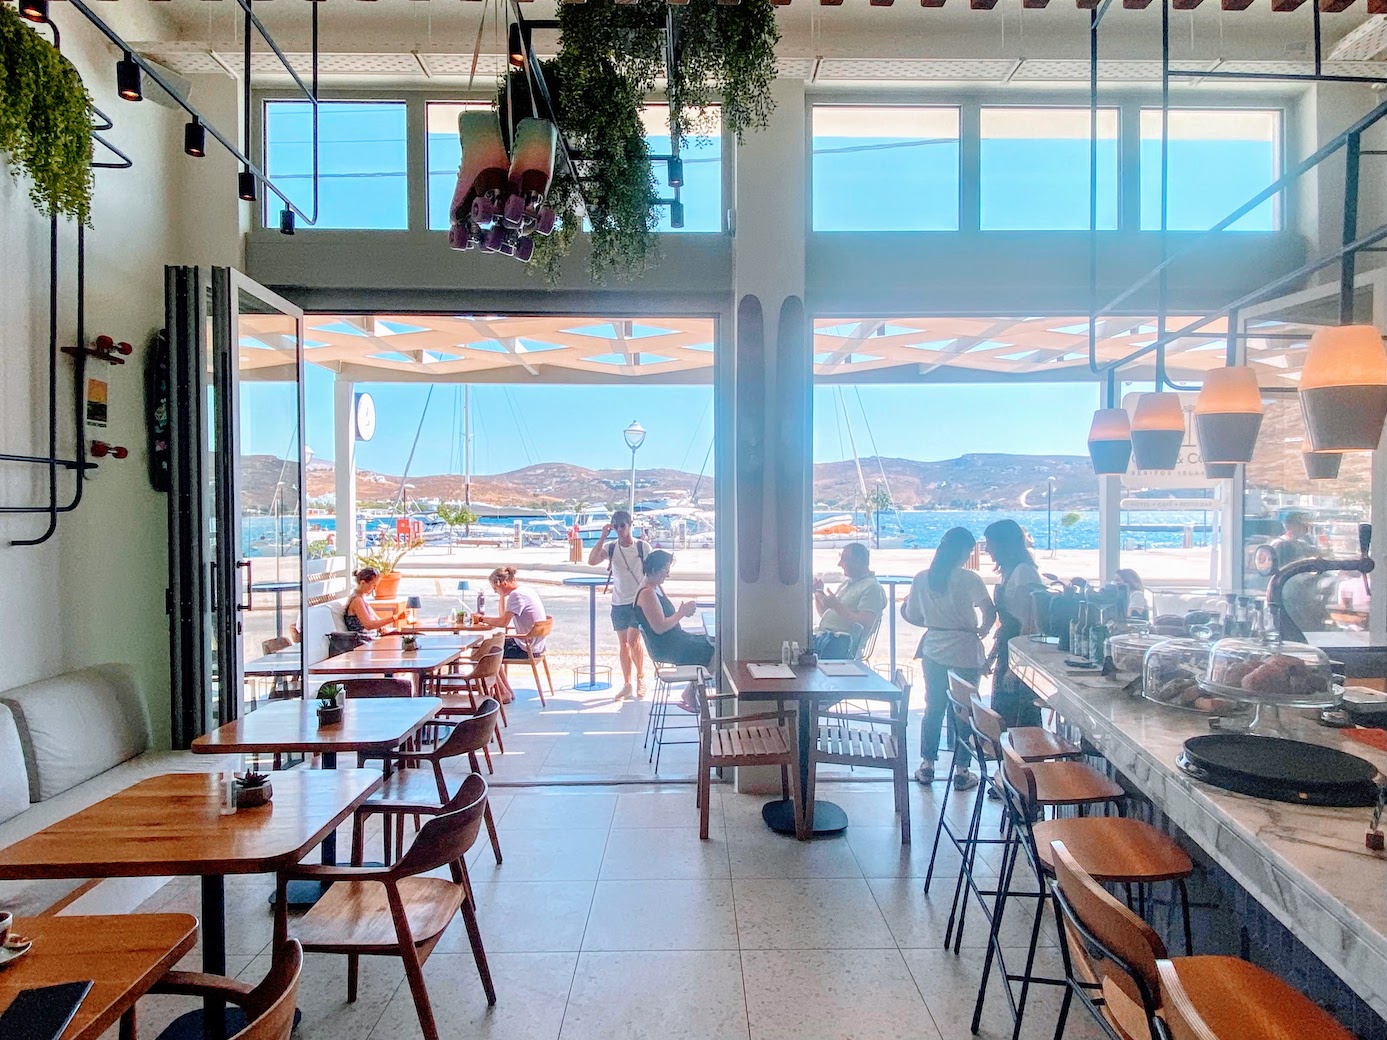 Serifos: eclectic brunch vibes at Chill &Co